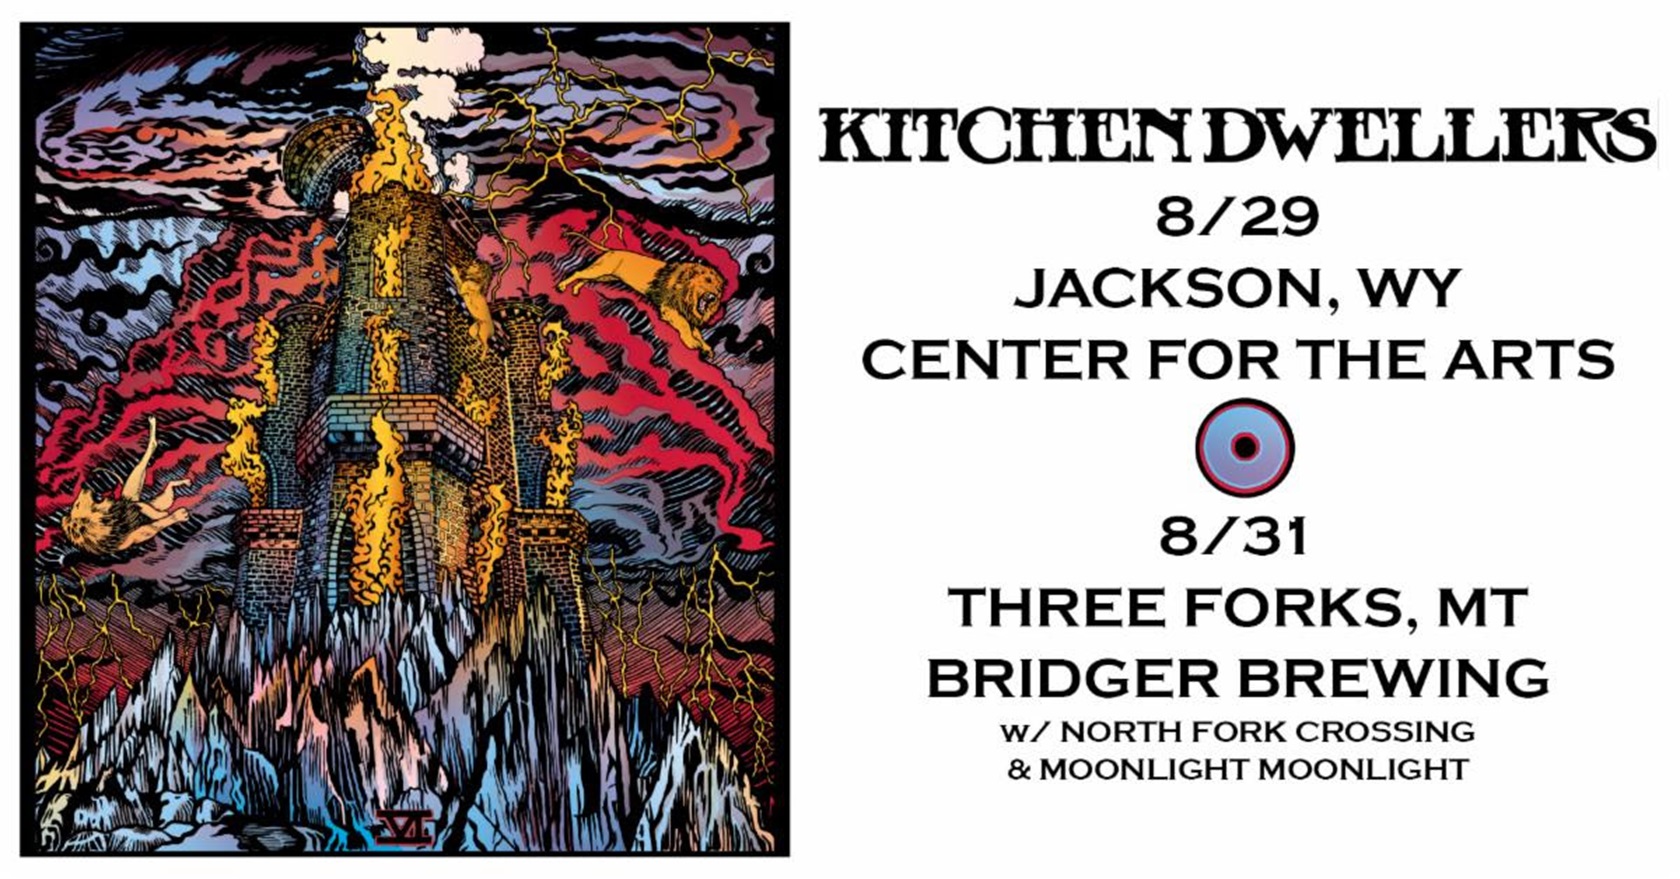 Kitchen Dwellers add more late summer shows in WY and MT